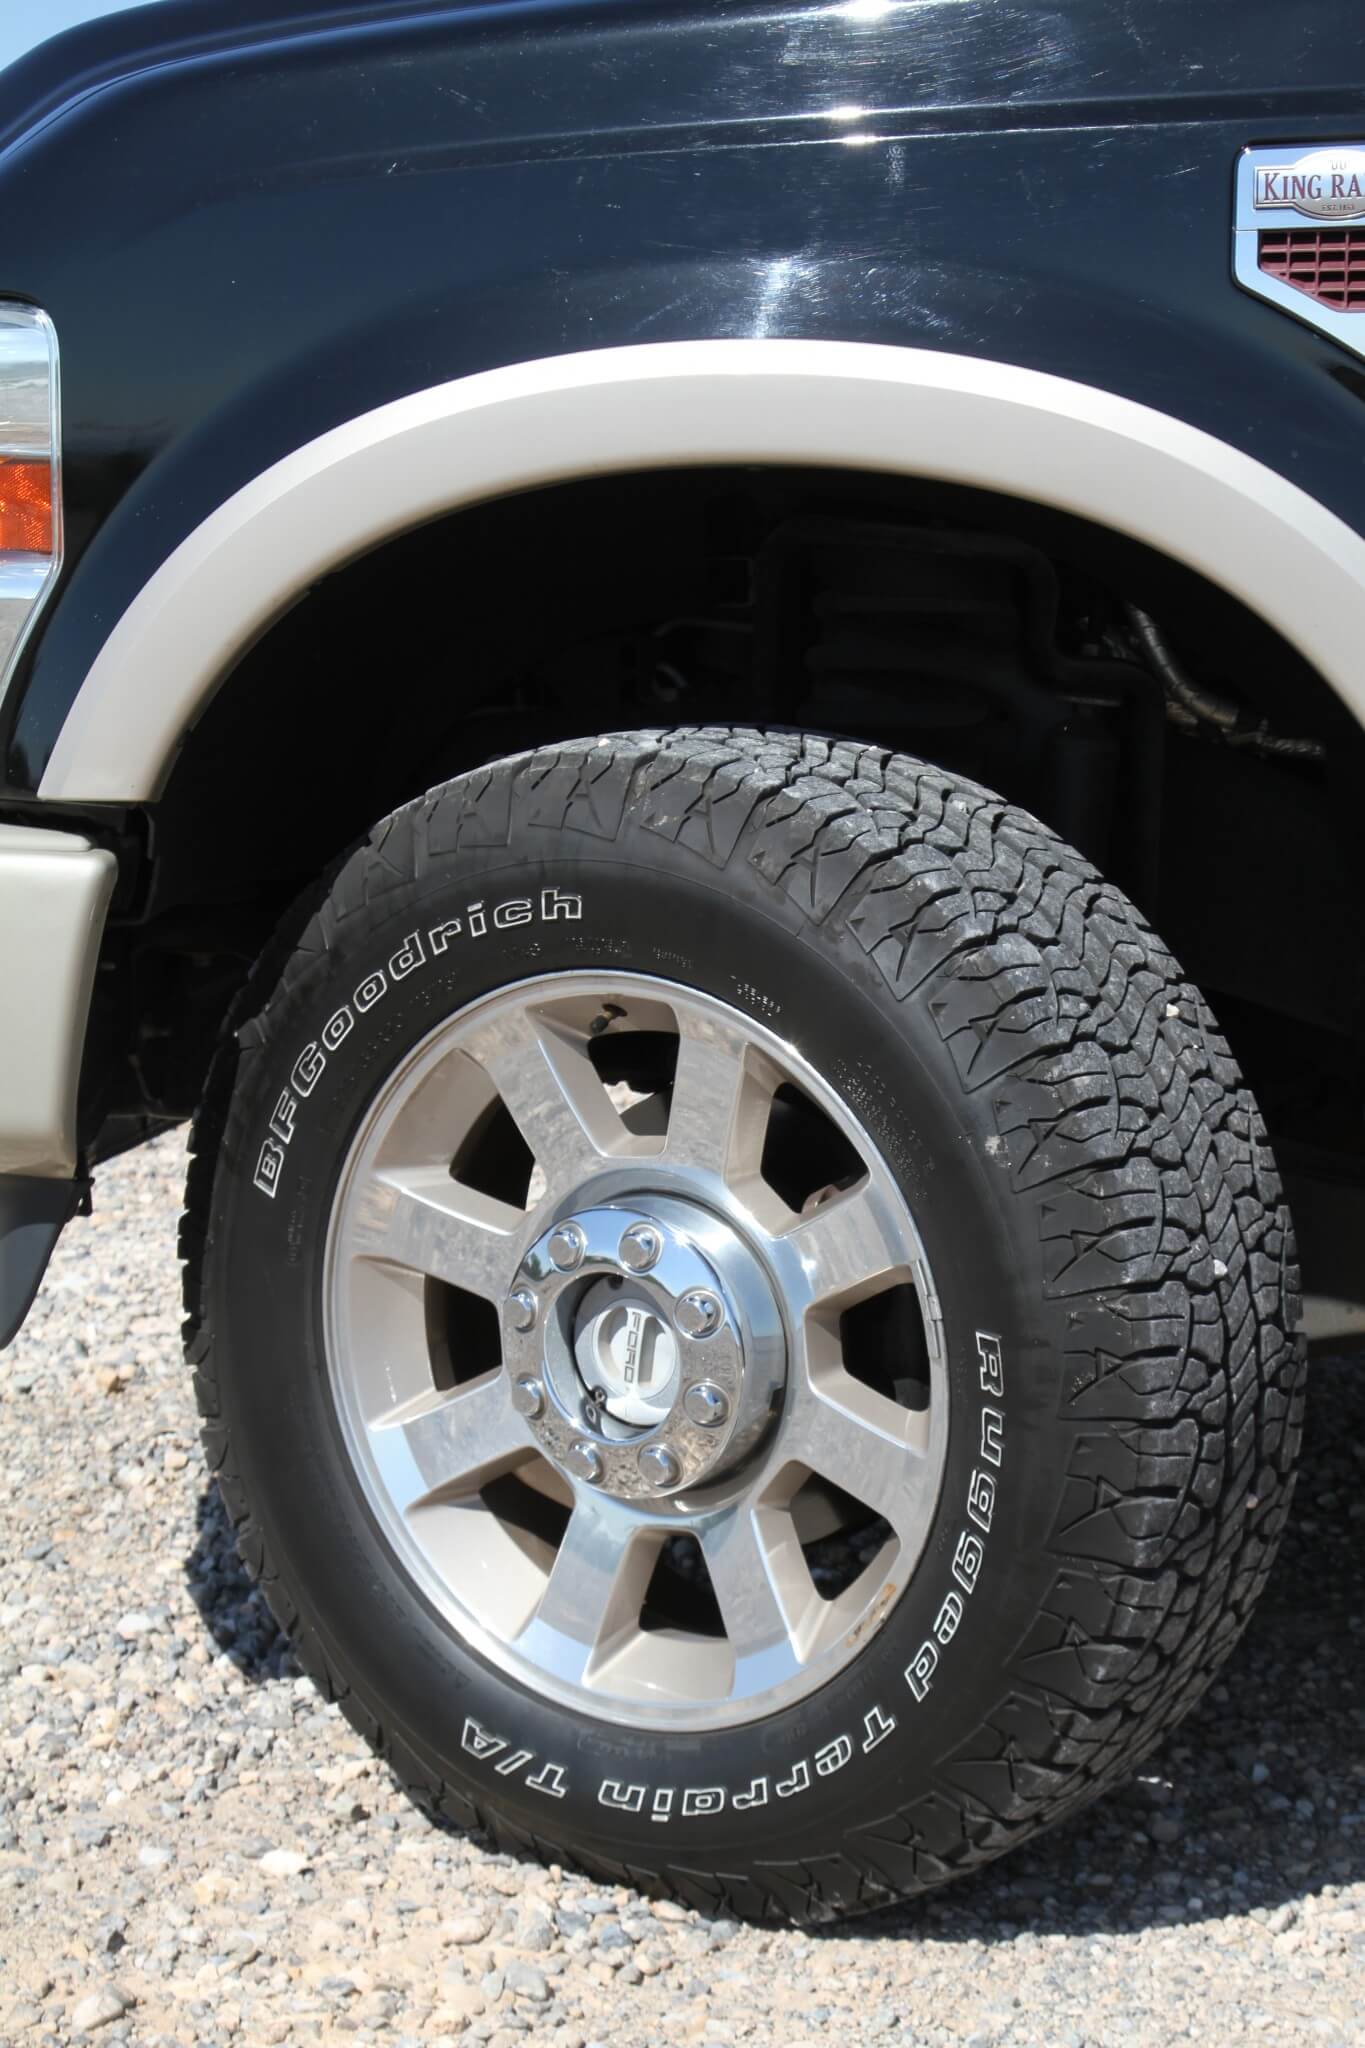 The factory 20x9 aluminum wheels were consumed with a set of BFGoodrich Rugged Terrain T/A tires.